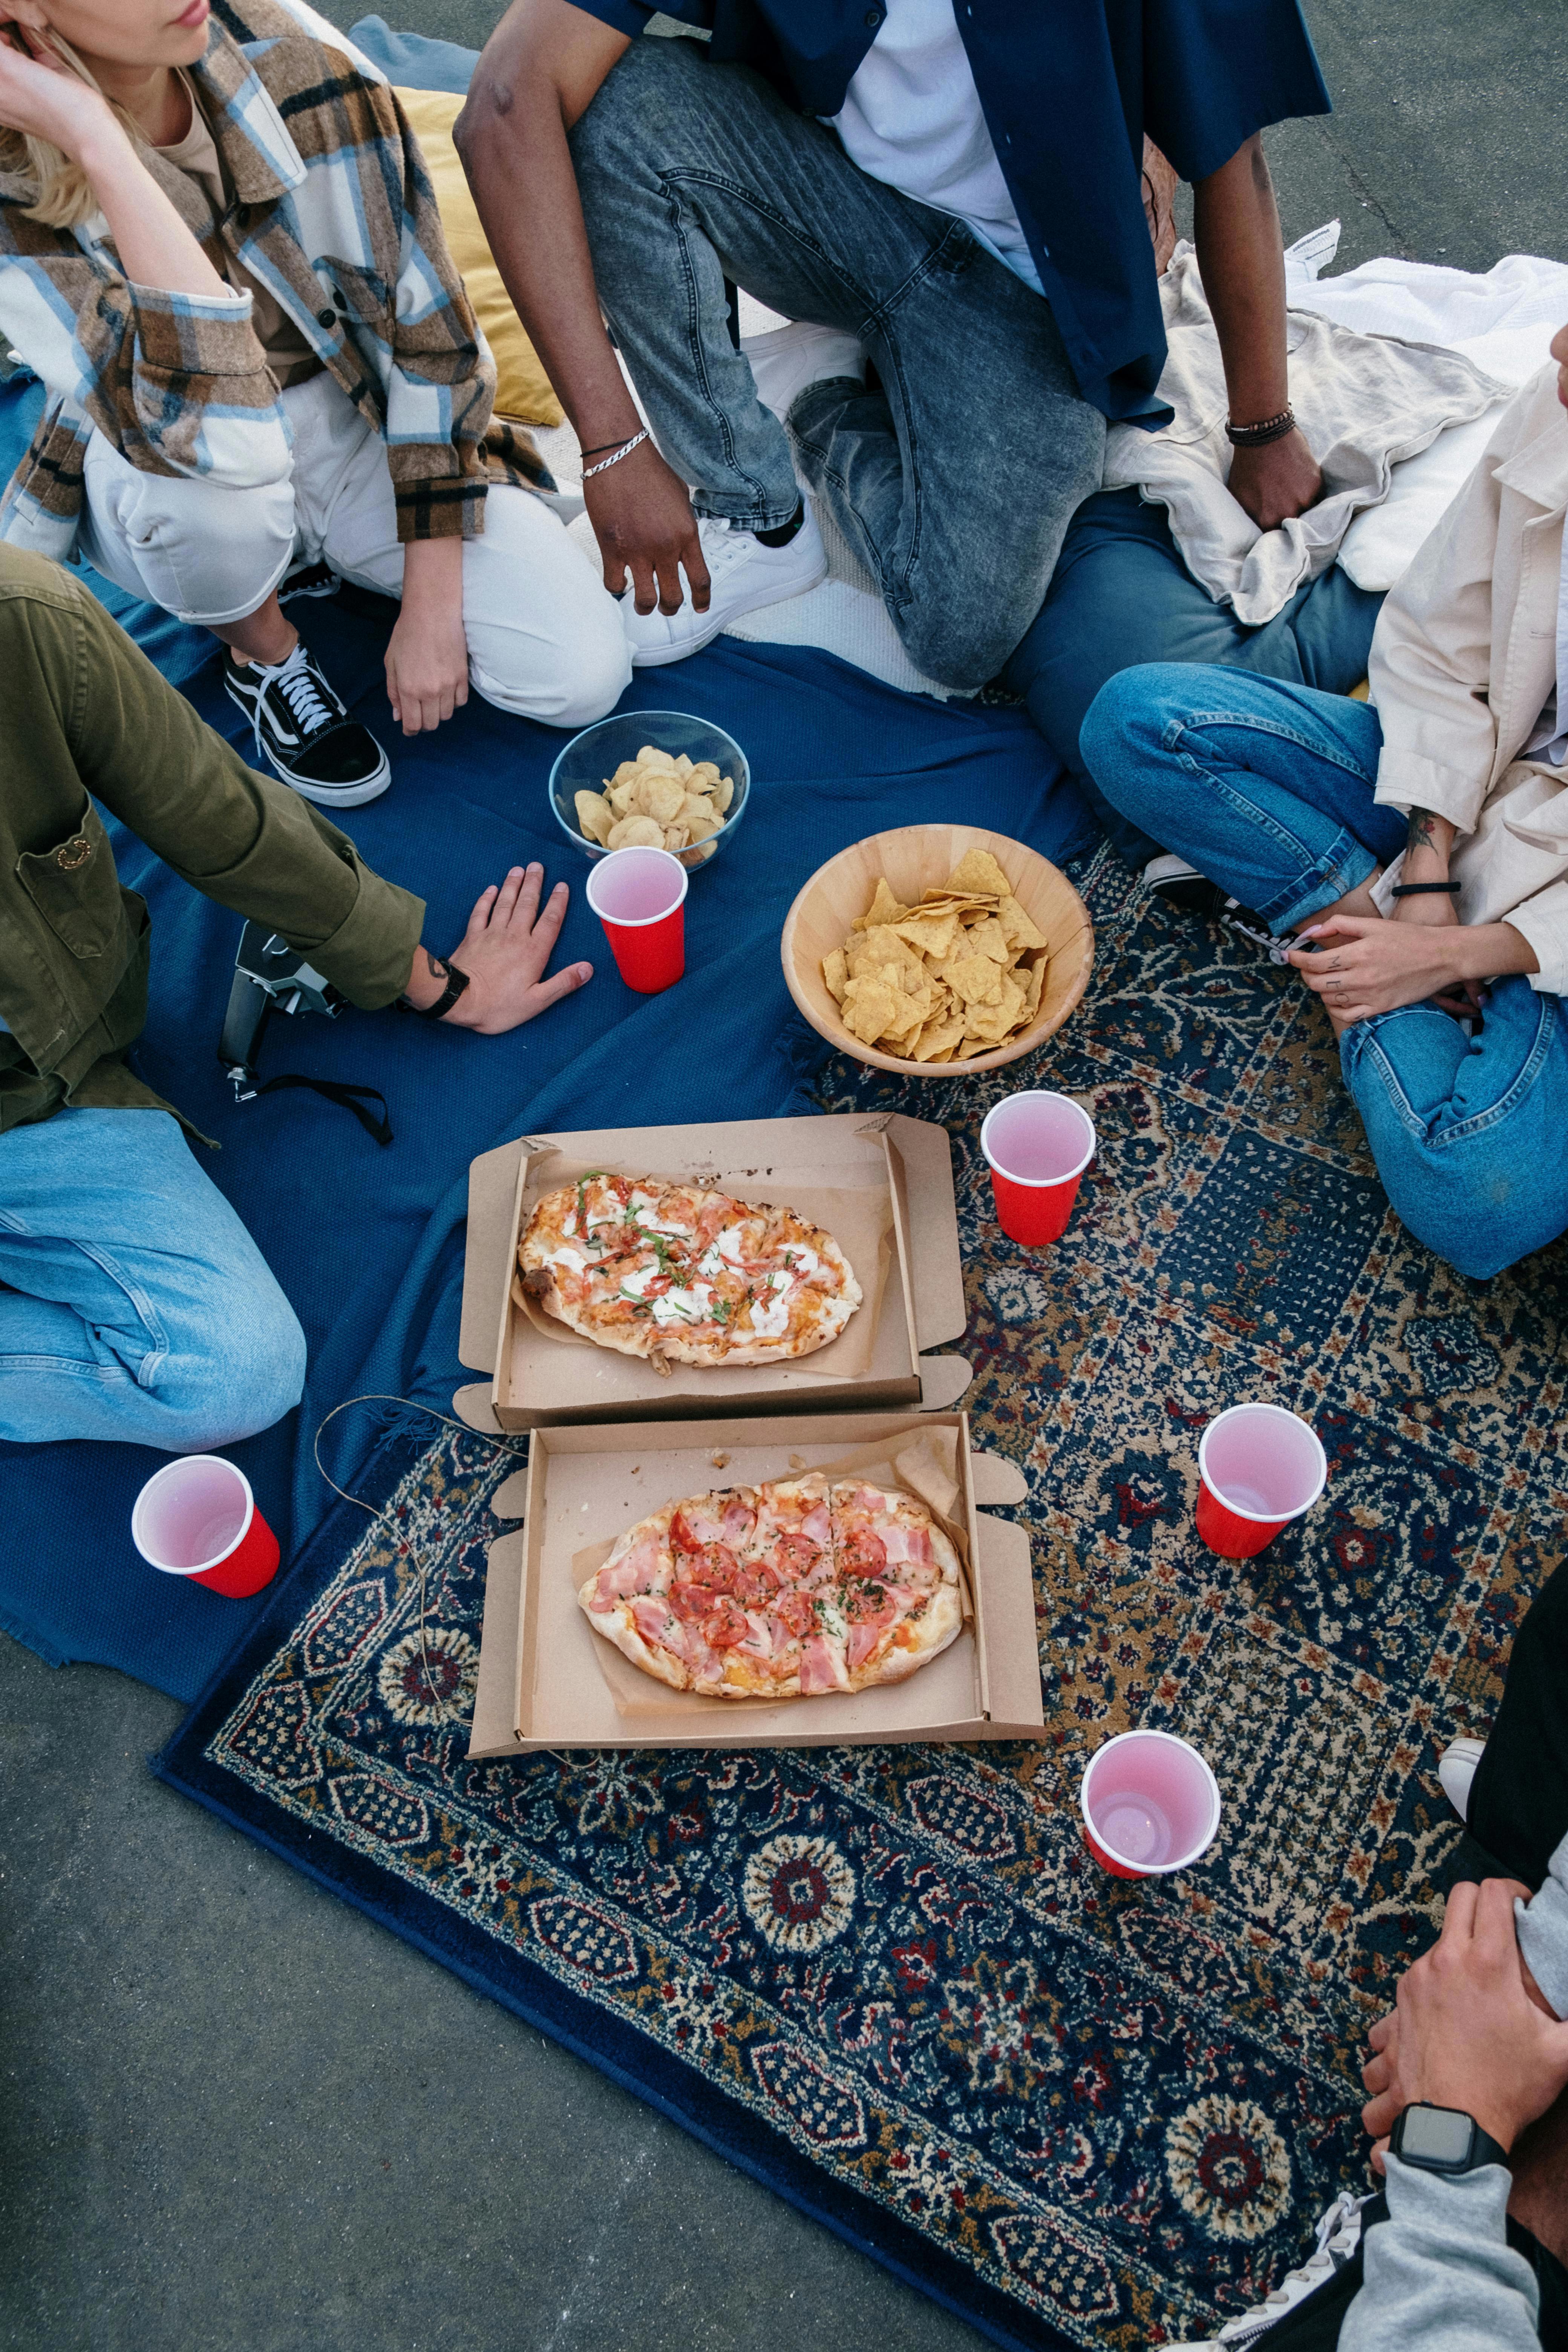 Stock image of friends eating pizza, chips and beer.